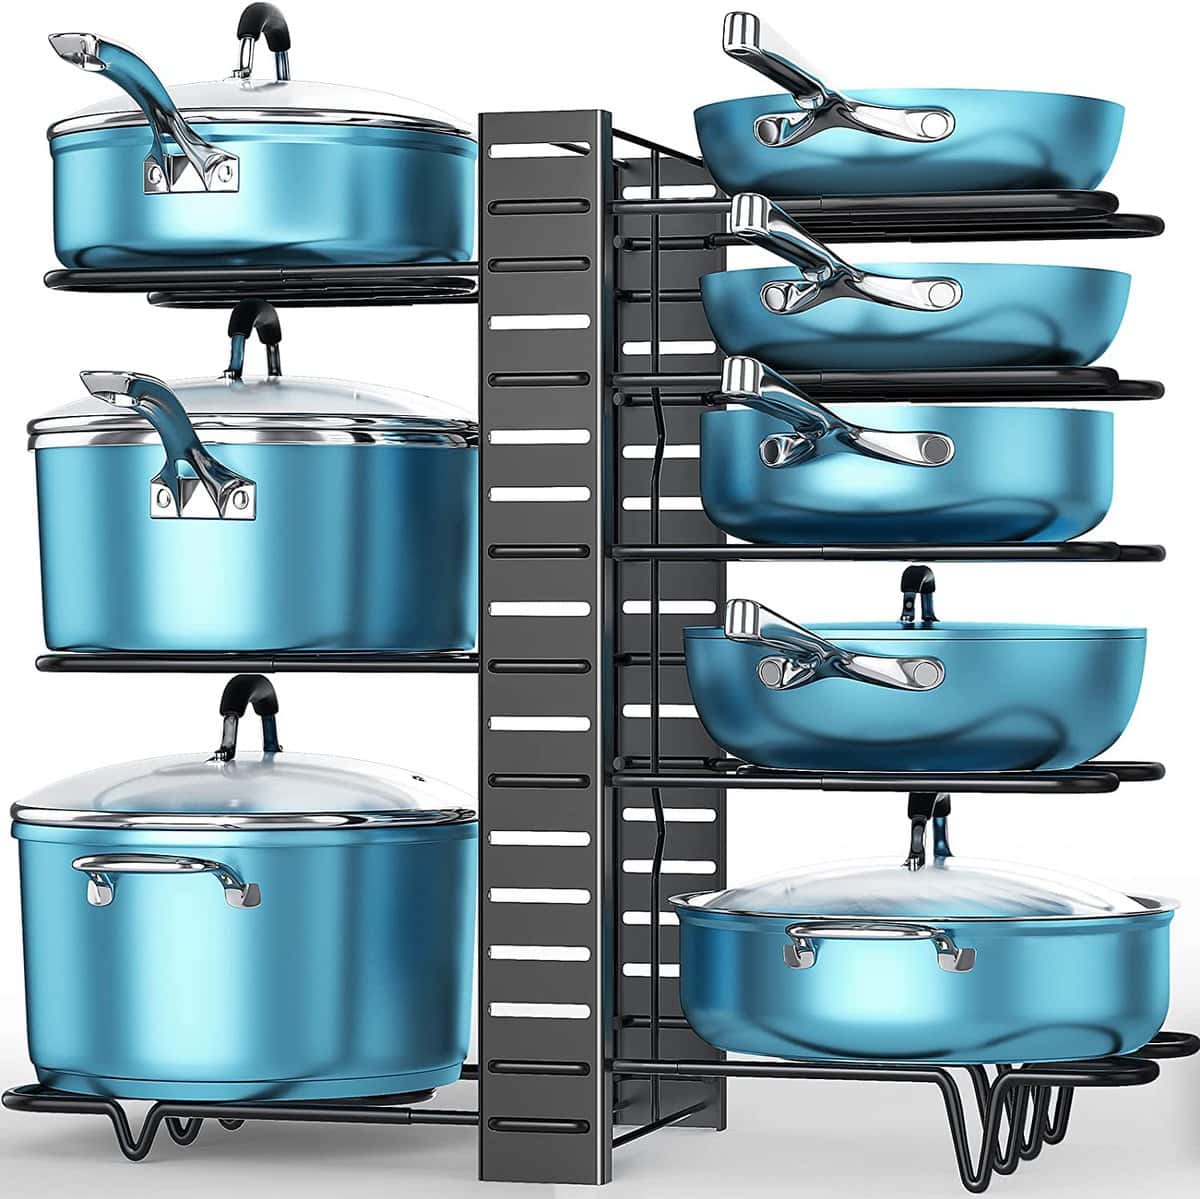 Kitchen organization ideas - A storage rack that vertically stores pots and pans with their lids.